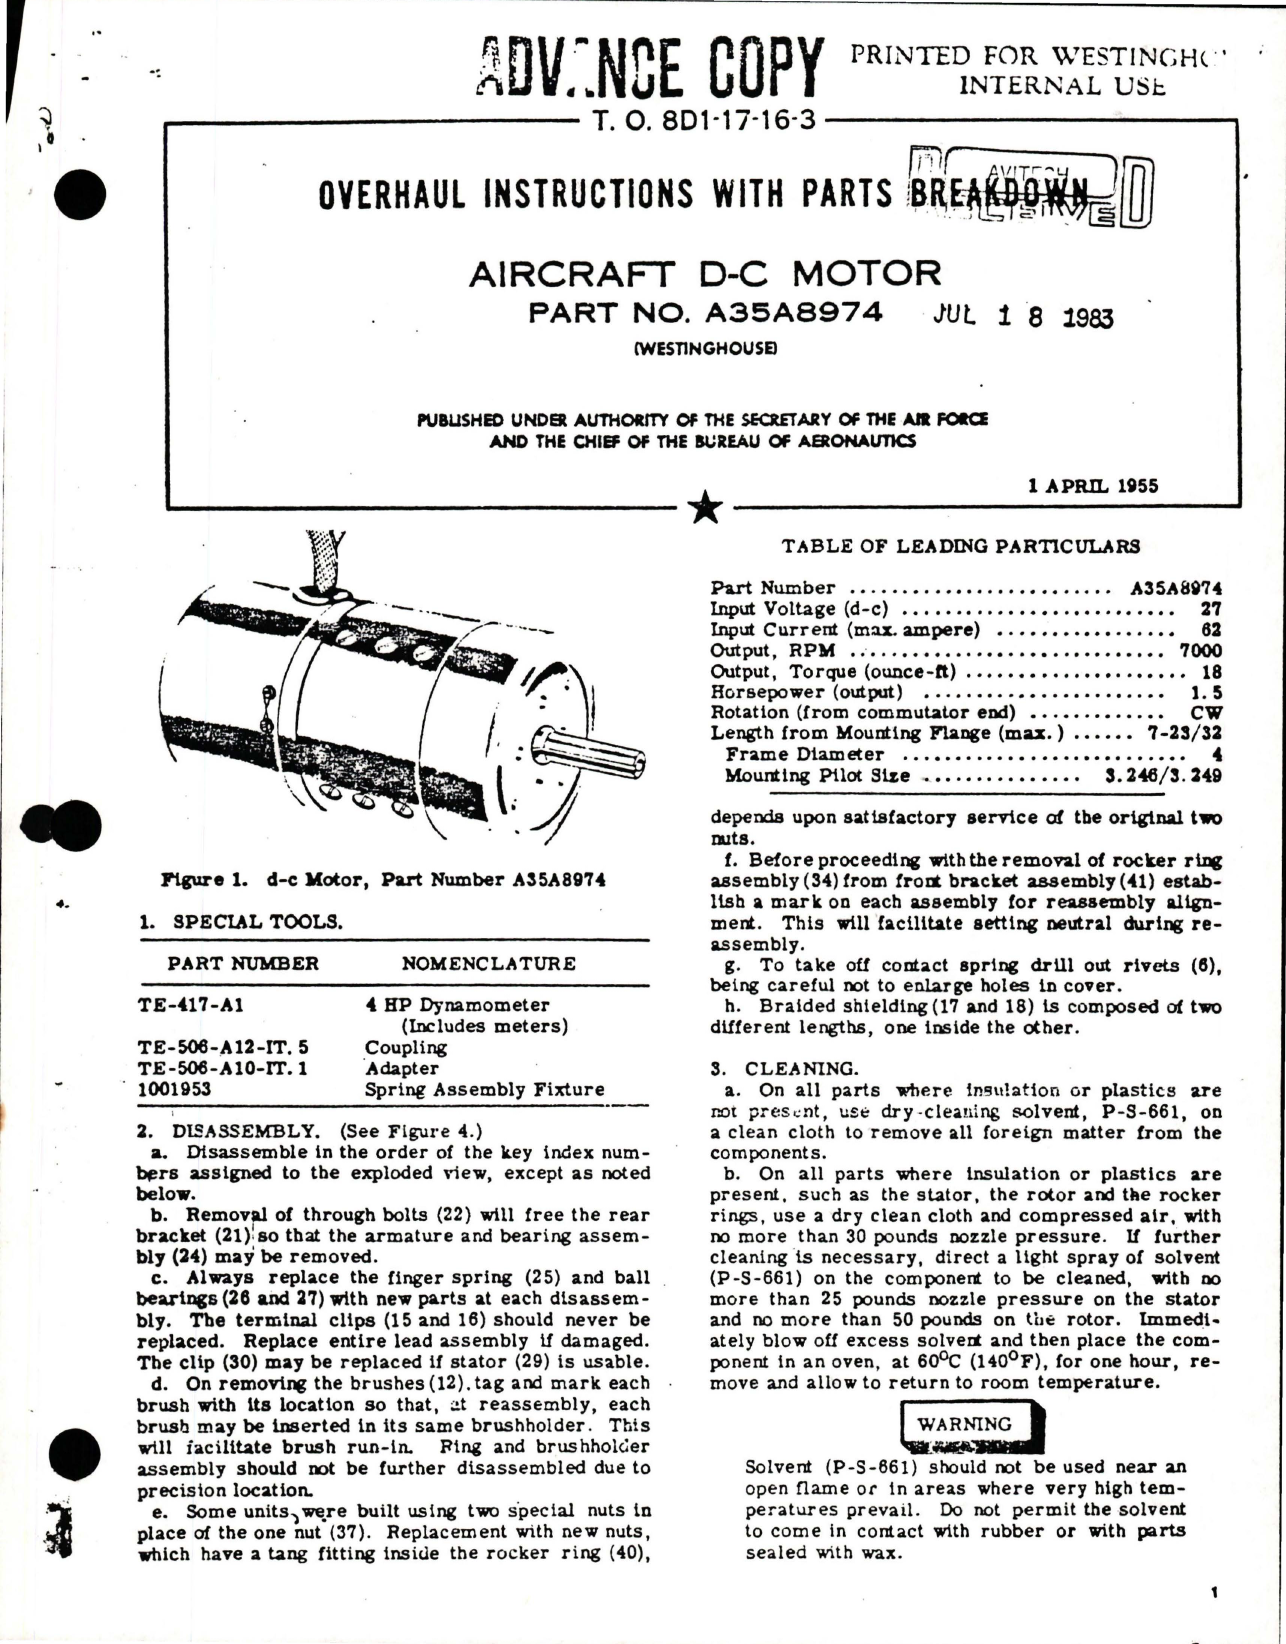 Sample page 1 from AirCorps Library document: Overhaul Instructions with Parts Breakdown for DC Motor - Part A35A8974